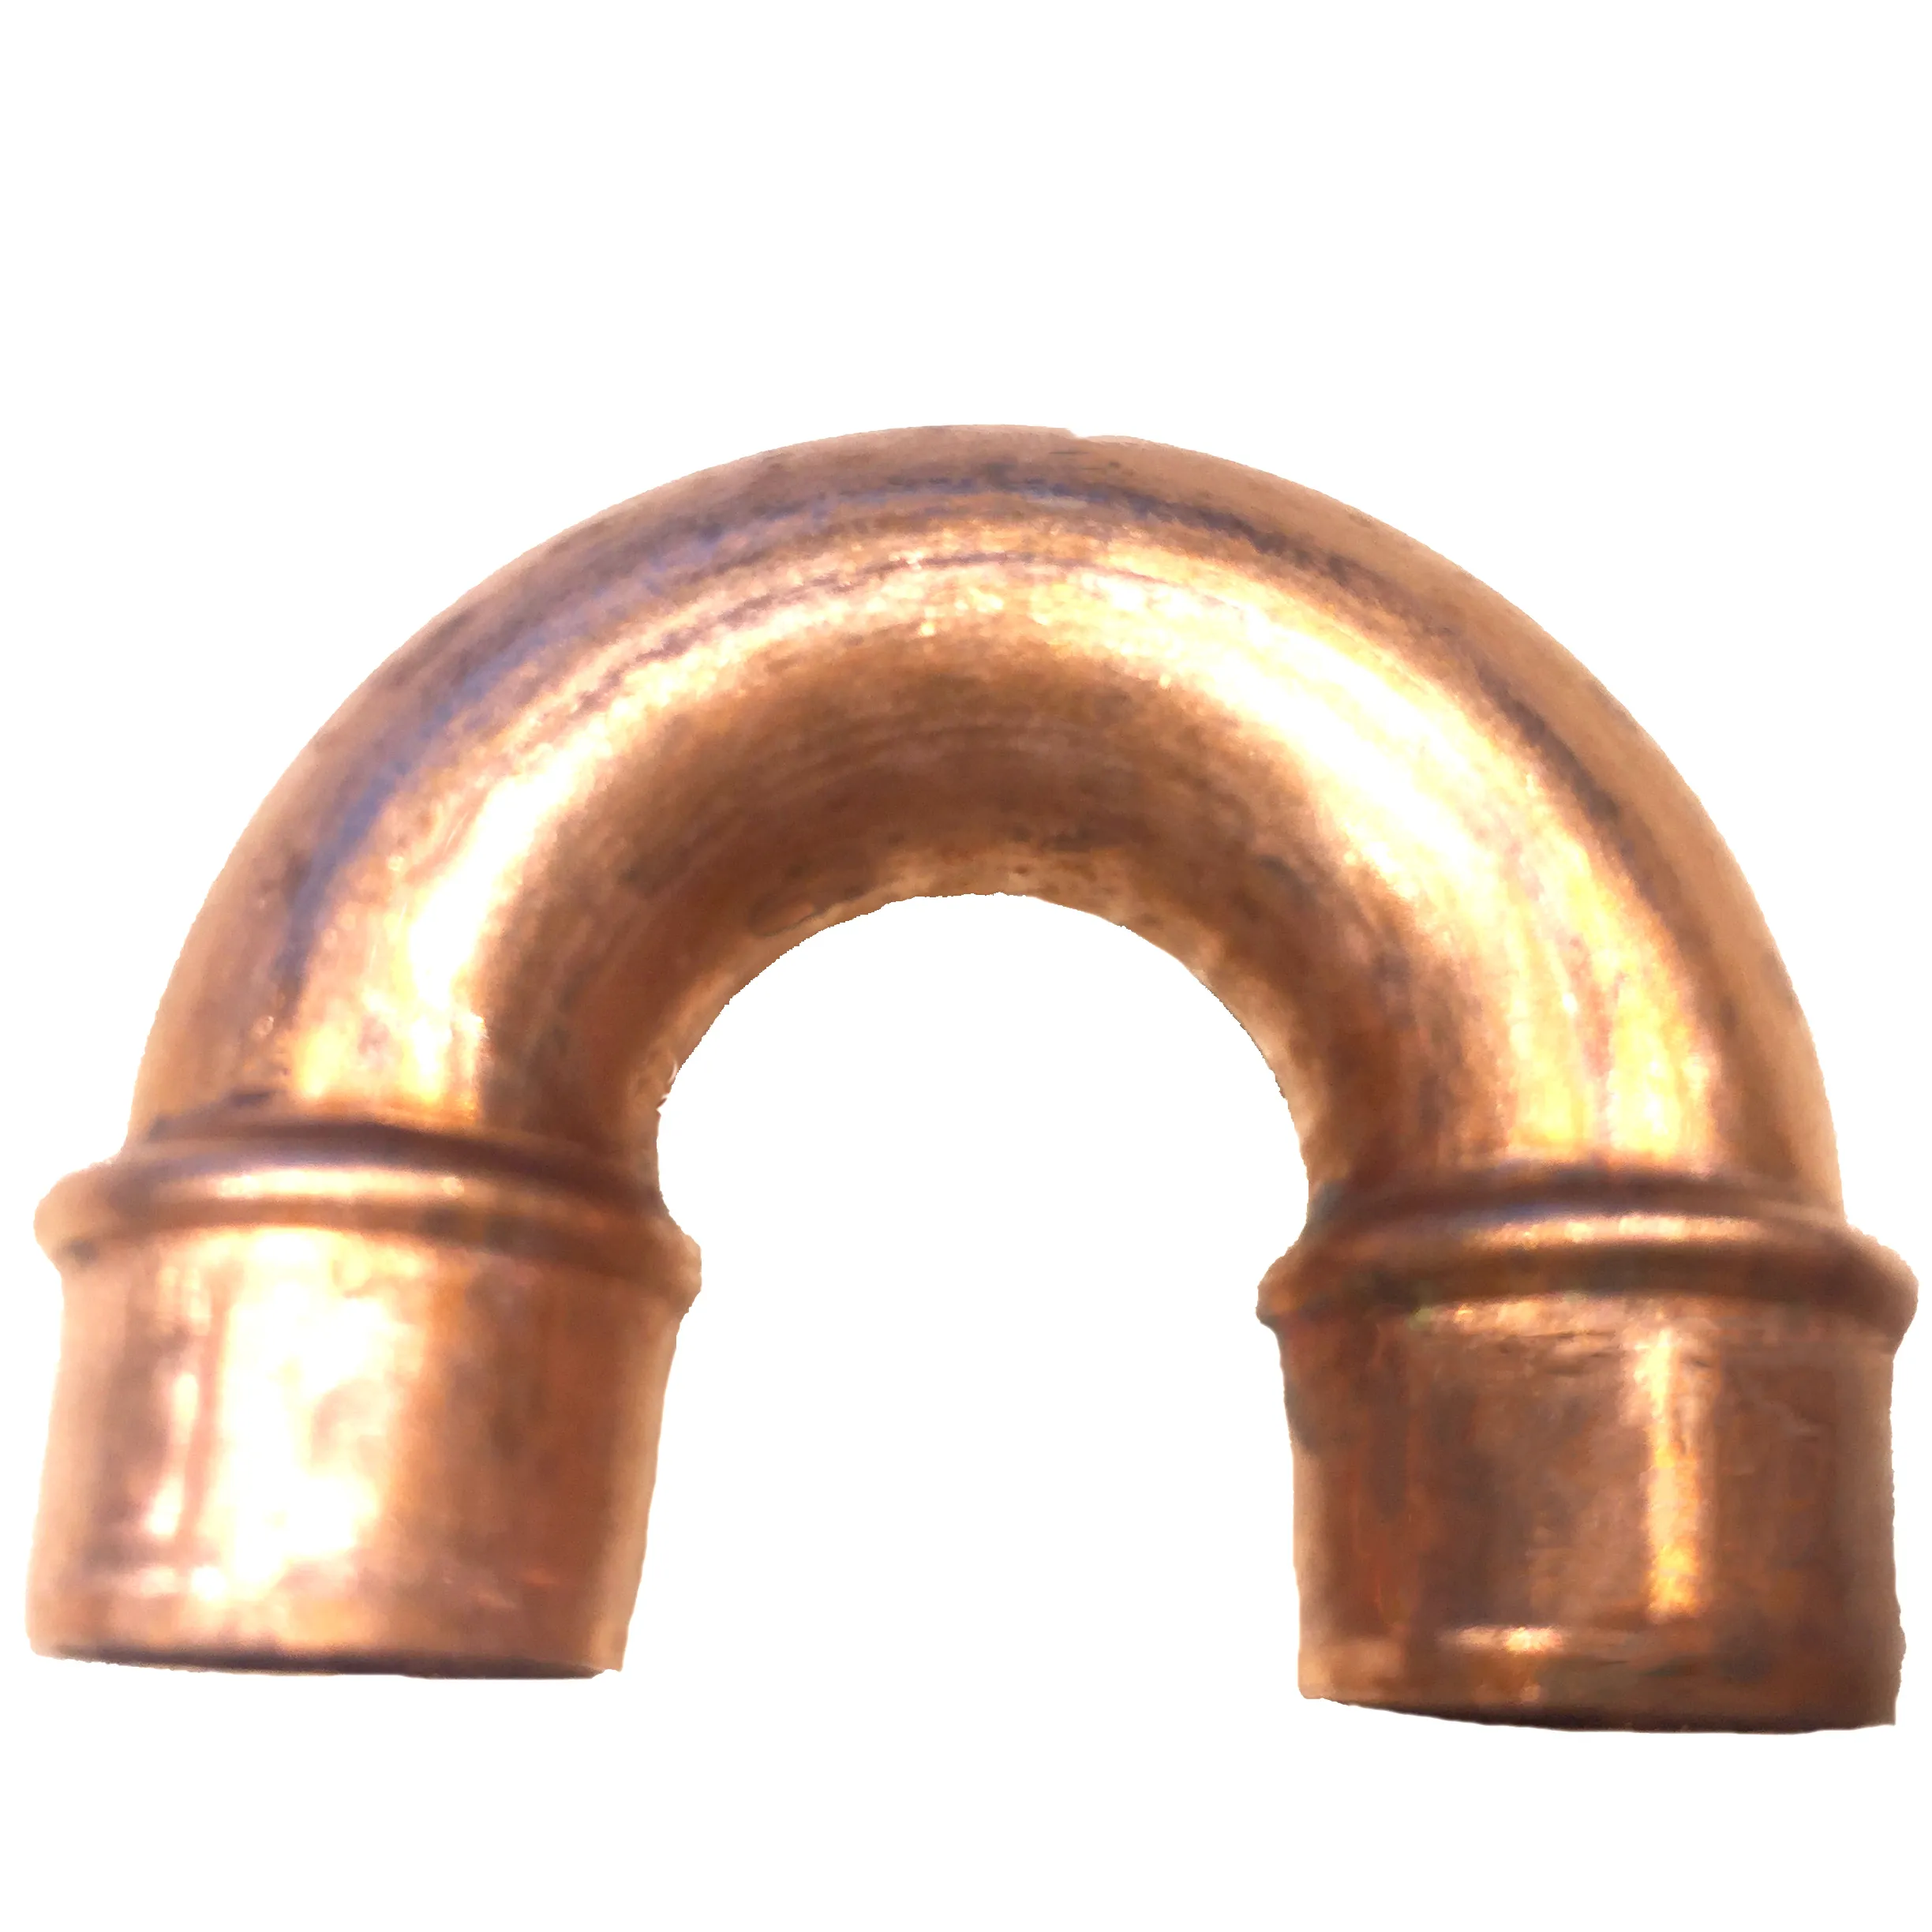 Small U-shaped copper elbows copper pipe fittings